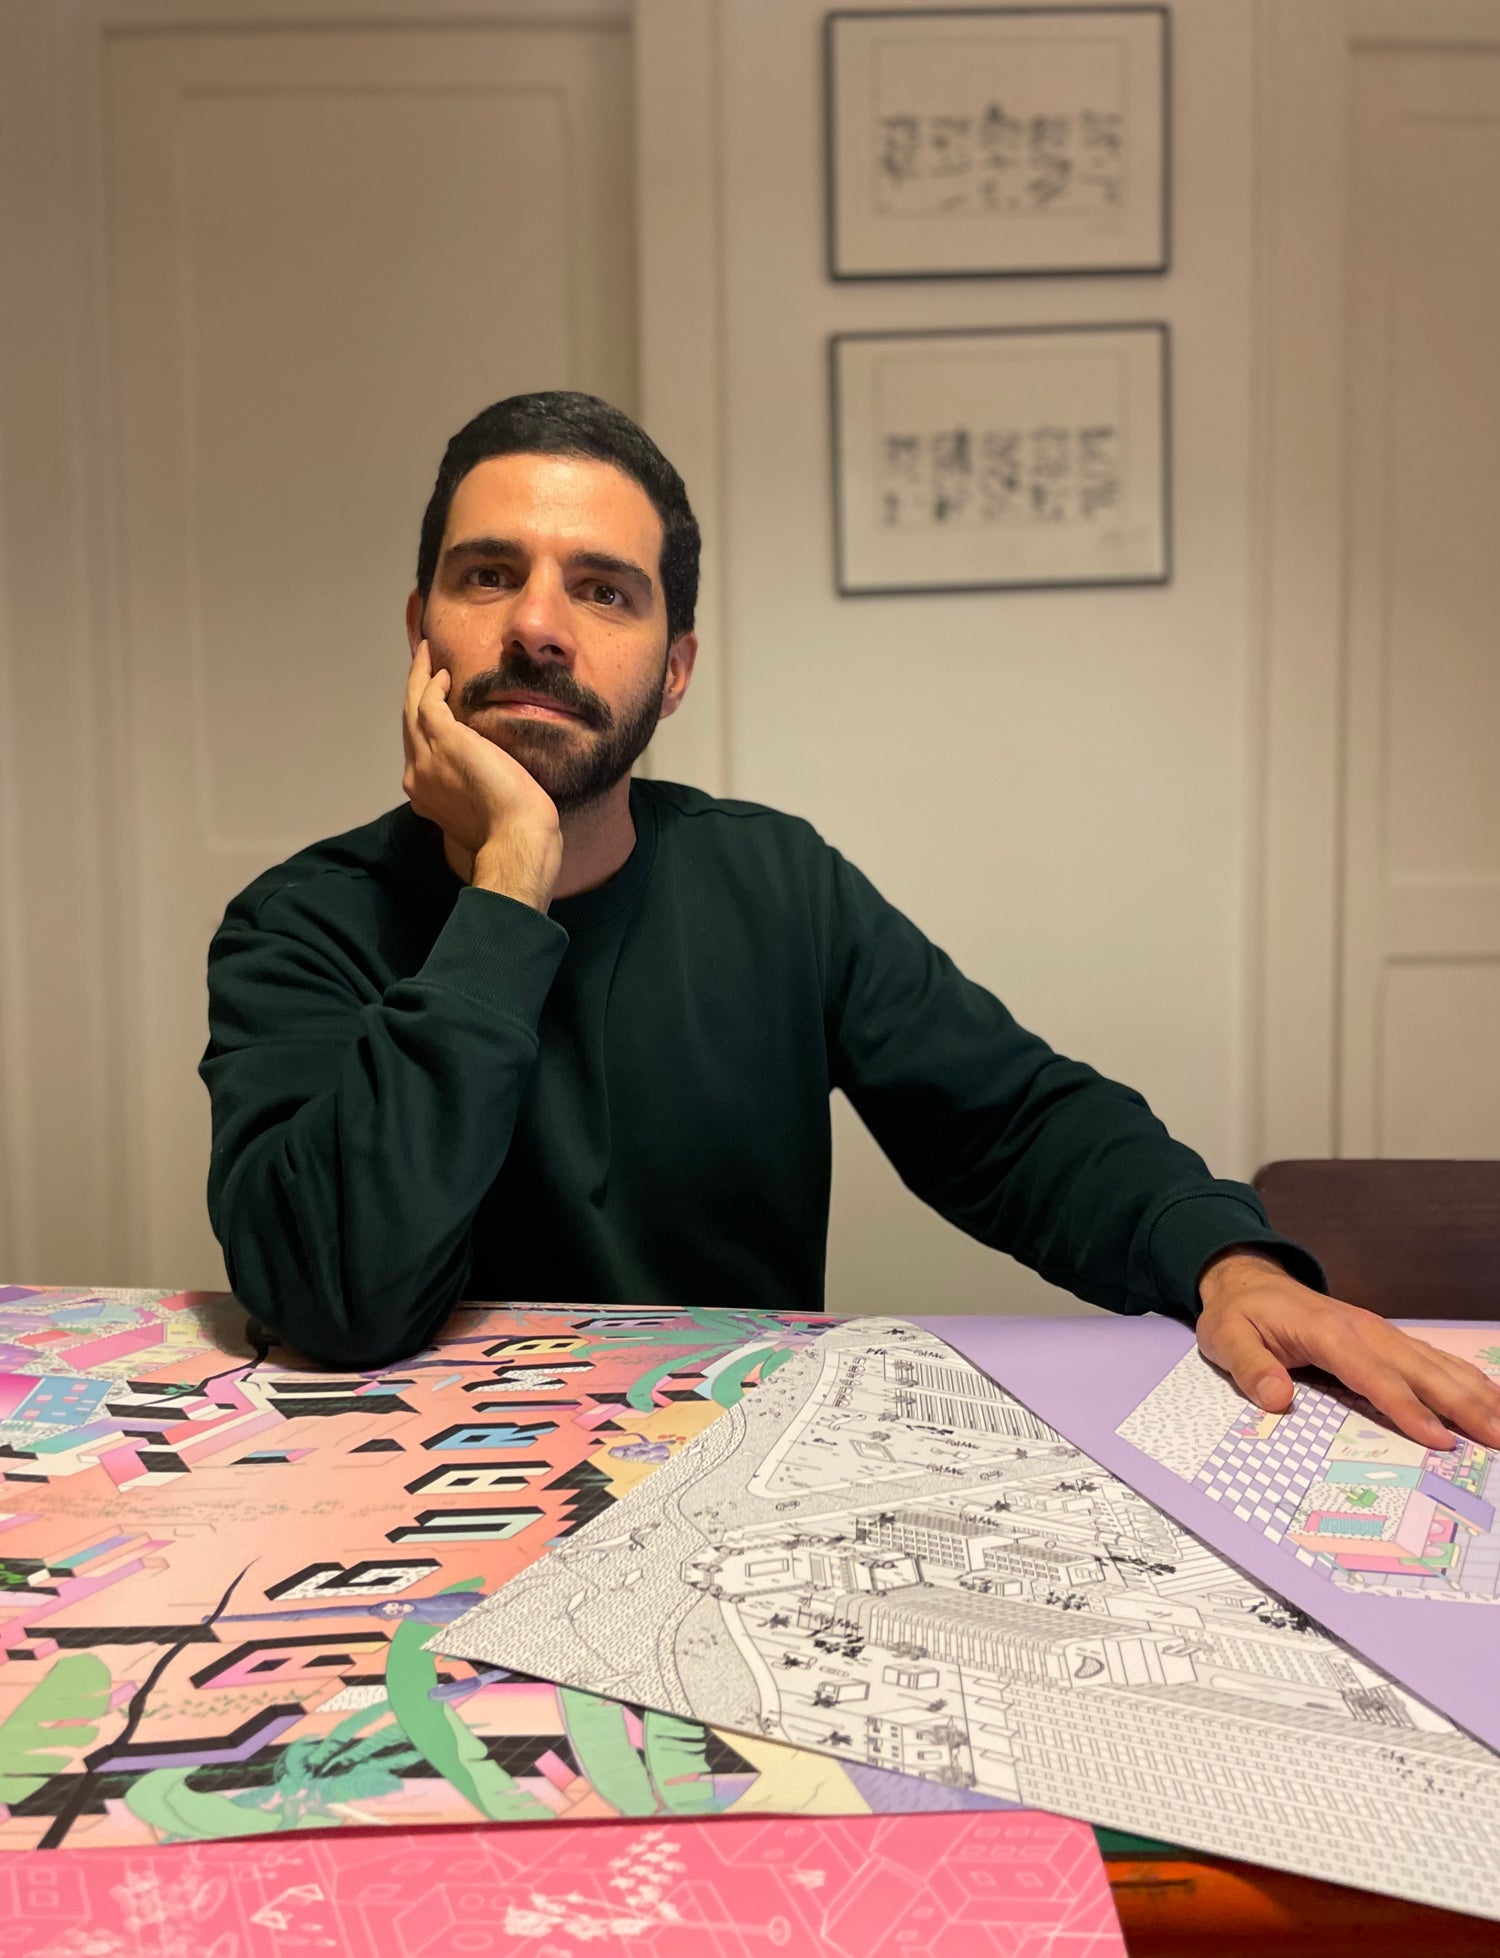 Artist and architect Bruno Pinto da Cruz sits at a table with his colourful, geometric designs on the table. He is wearing a black sweater, with one hand on the table, and the other holding his chin.